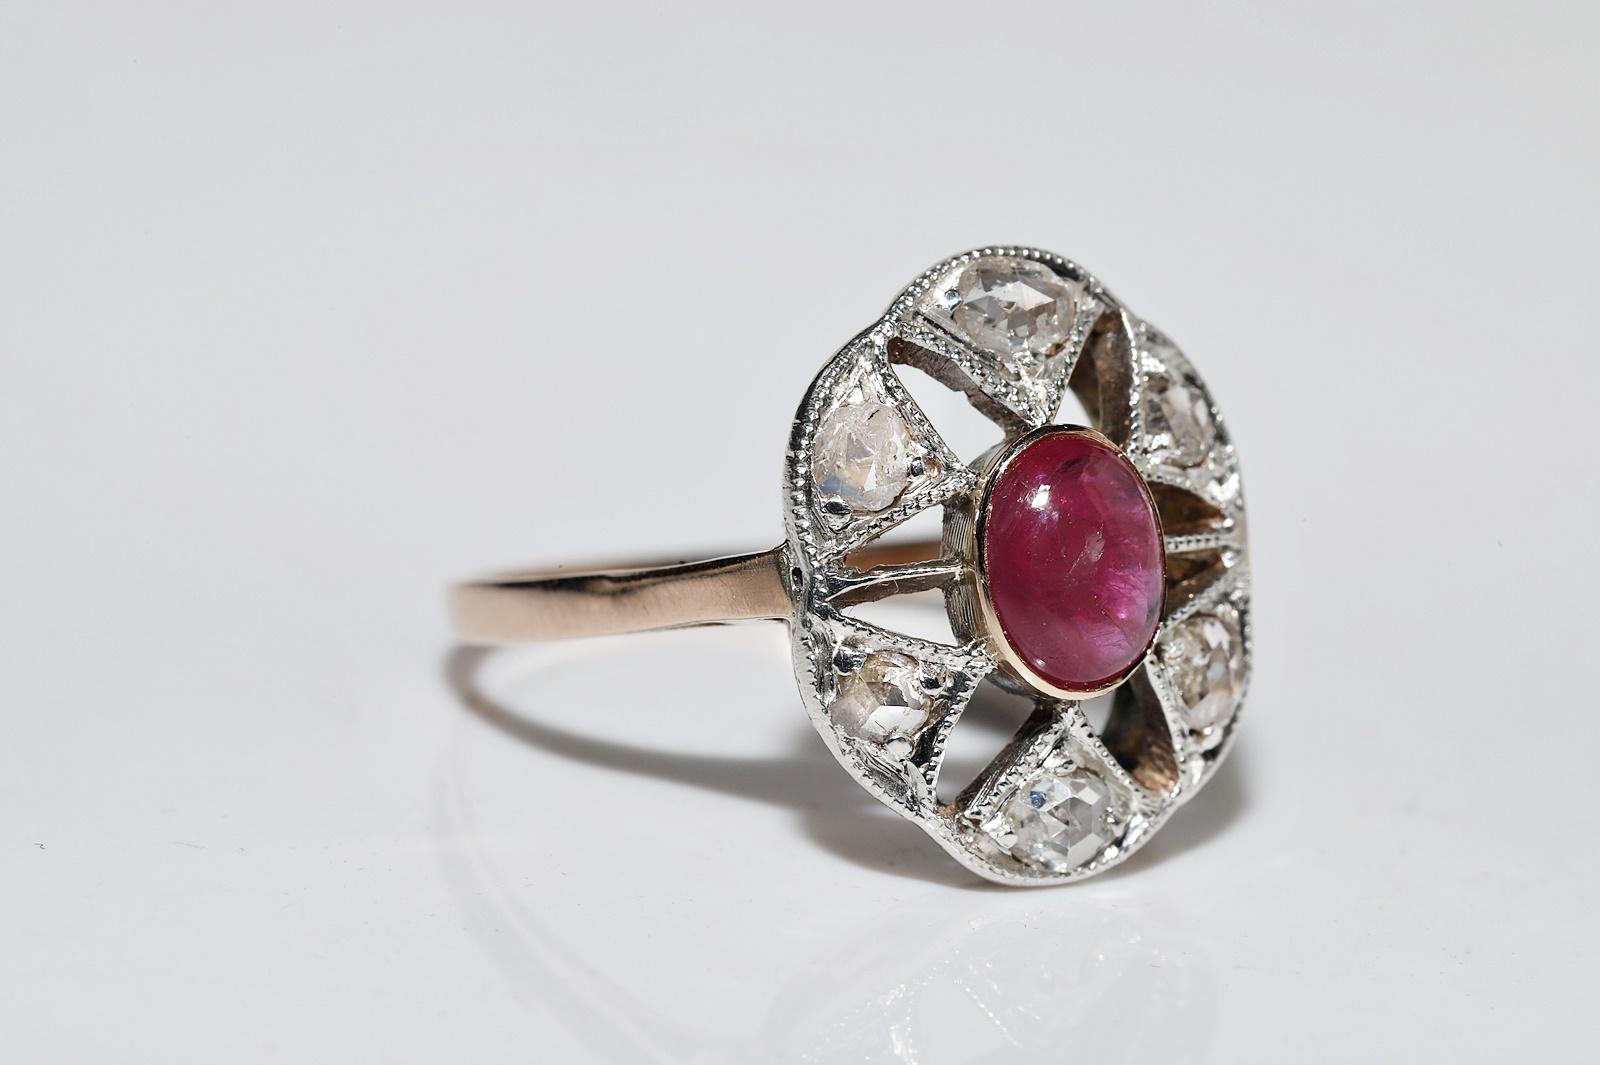  Circa 1900s 14k Gold Top Silver Natural Rose Cut Diamond And Cabochon Ruby Ring For Sale 3